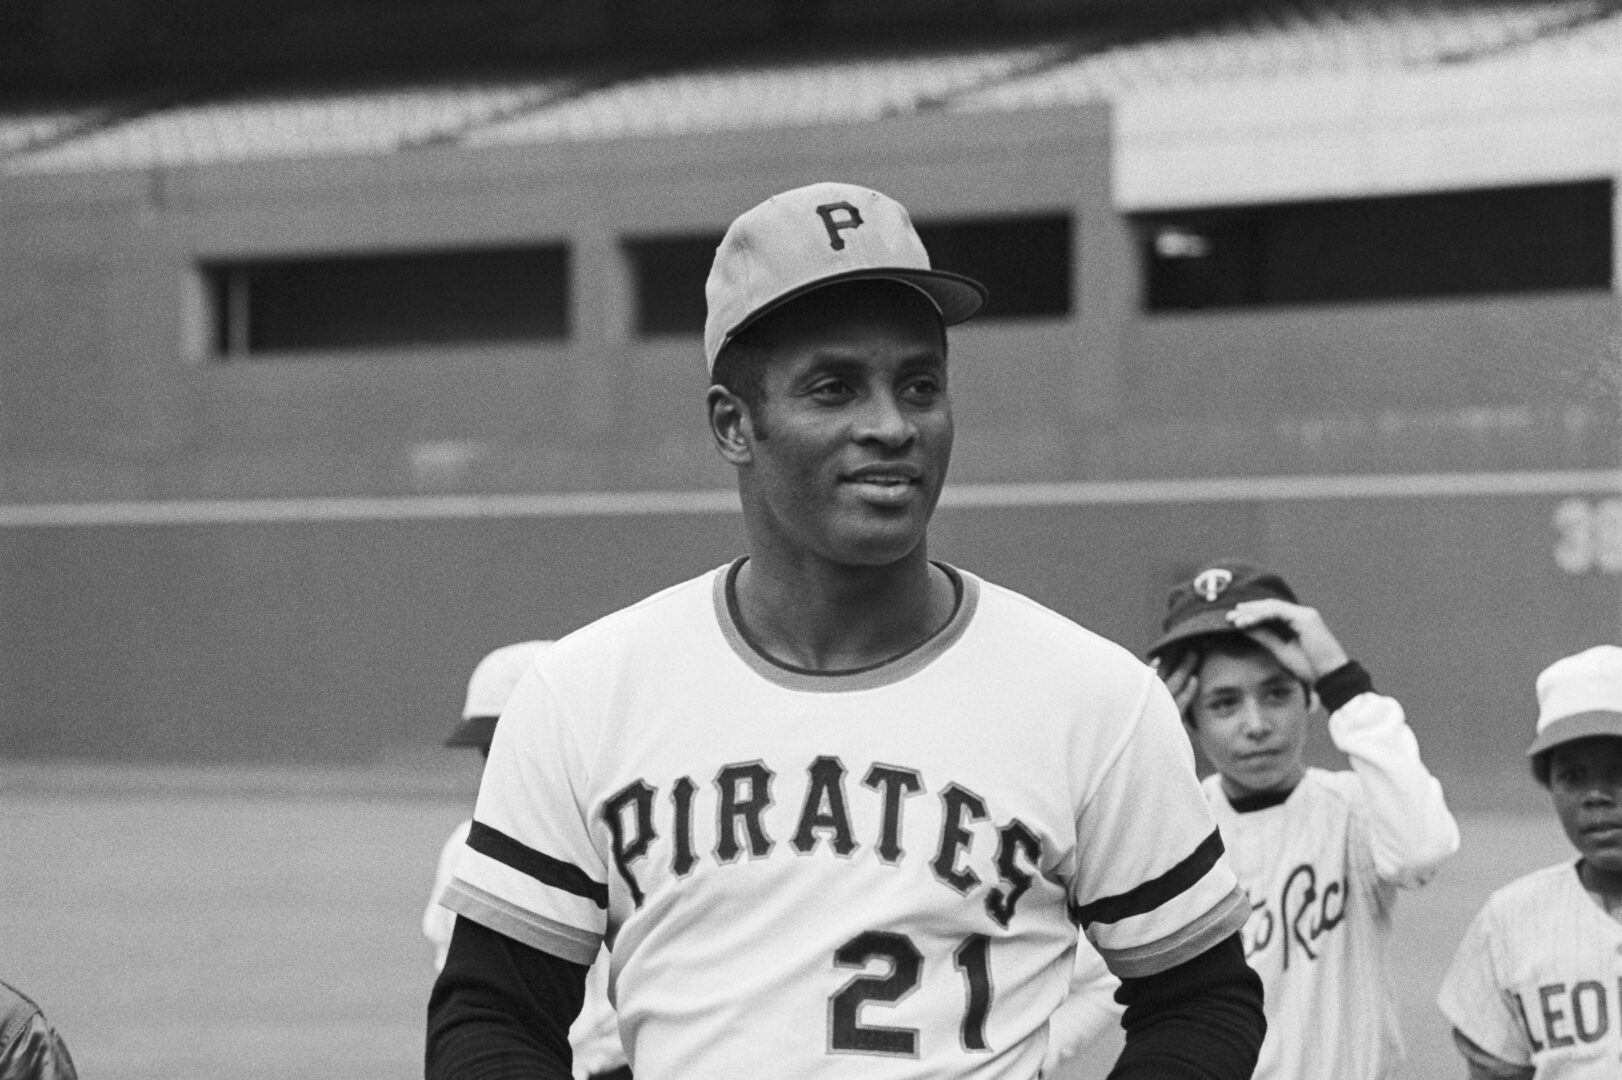 It's going to be unbelievable': Pirates psyched to honor Roberto Clemente  by donning No. 21 next week